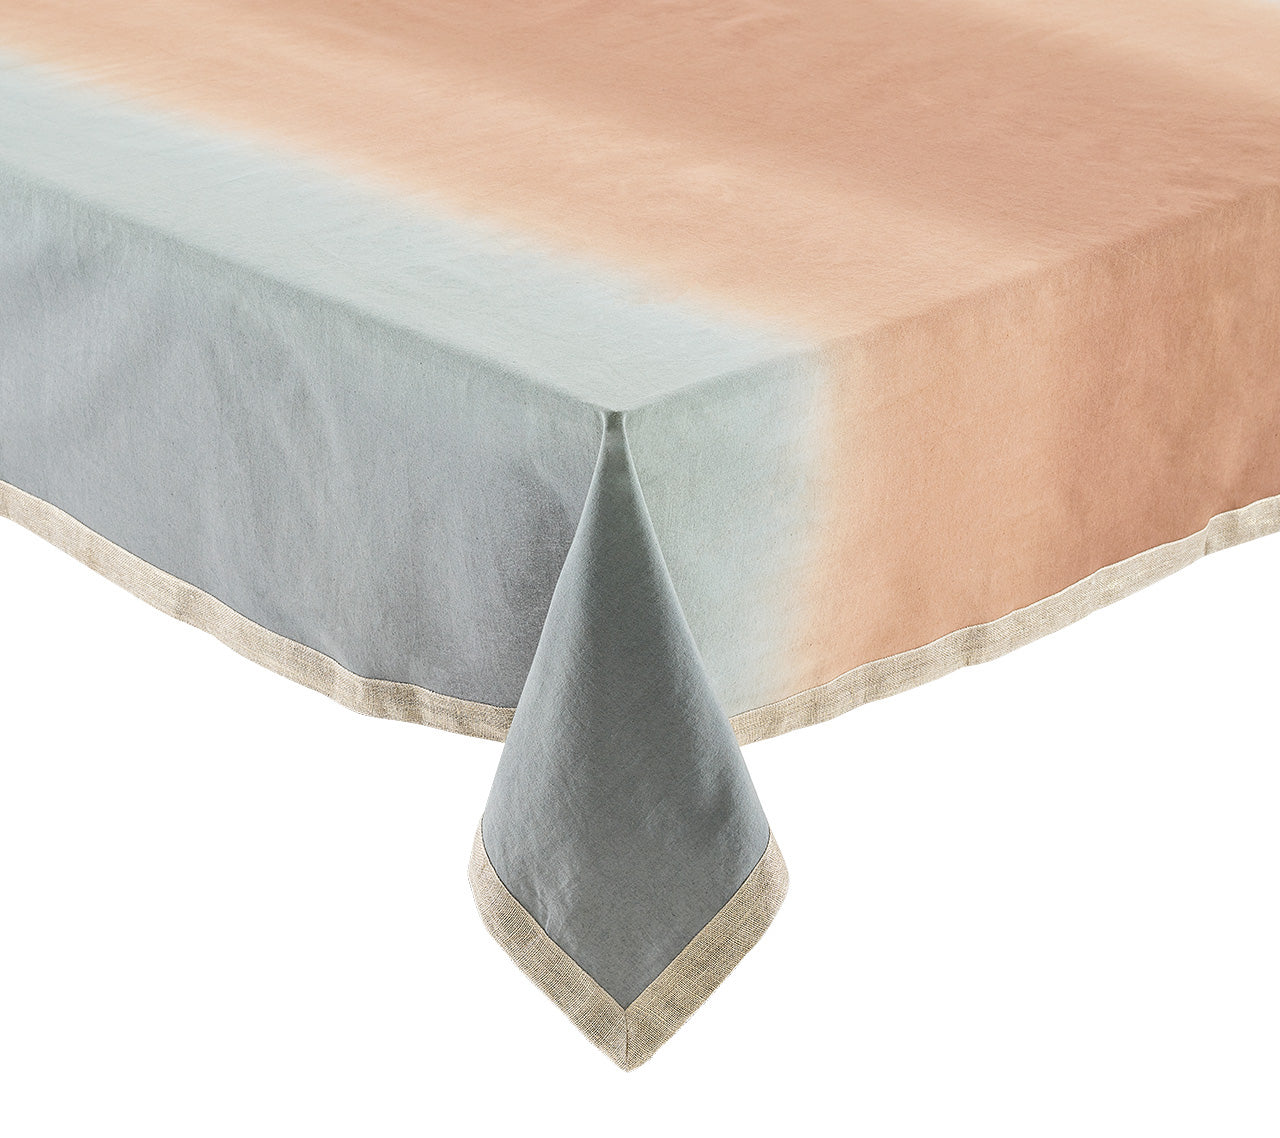 Dip Dye Tablecloth in Beige, Taupe & Gray